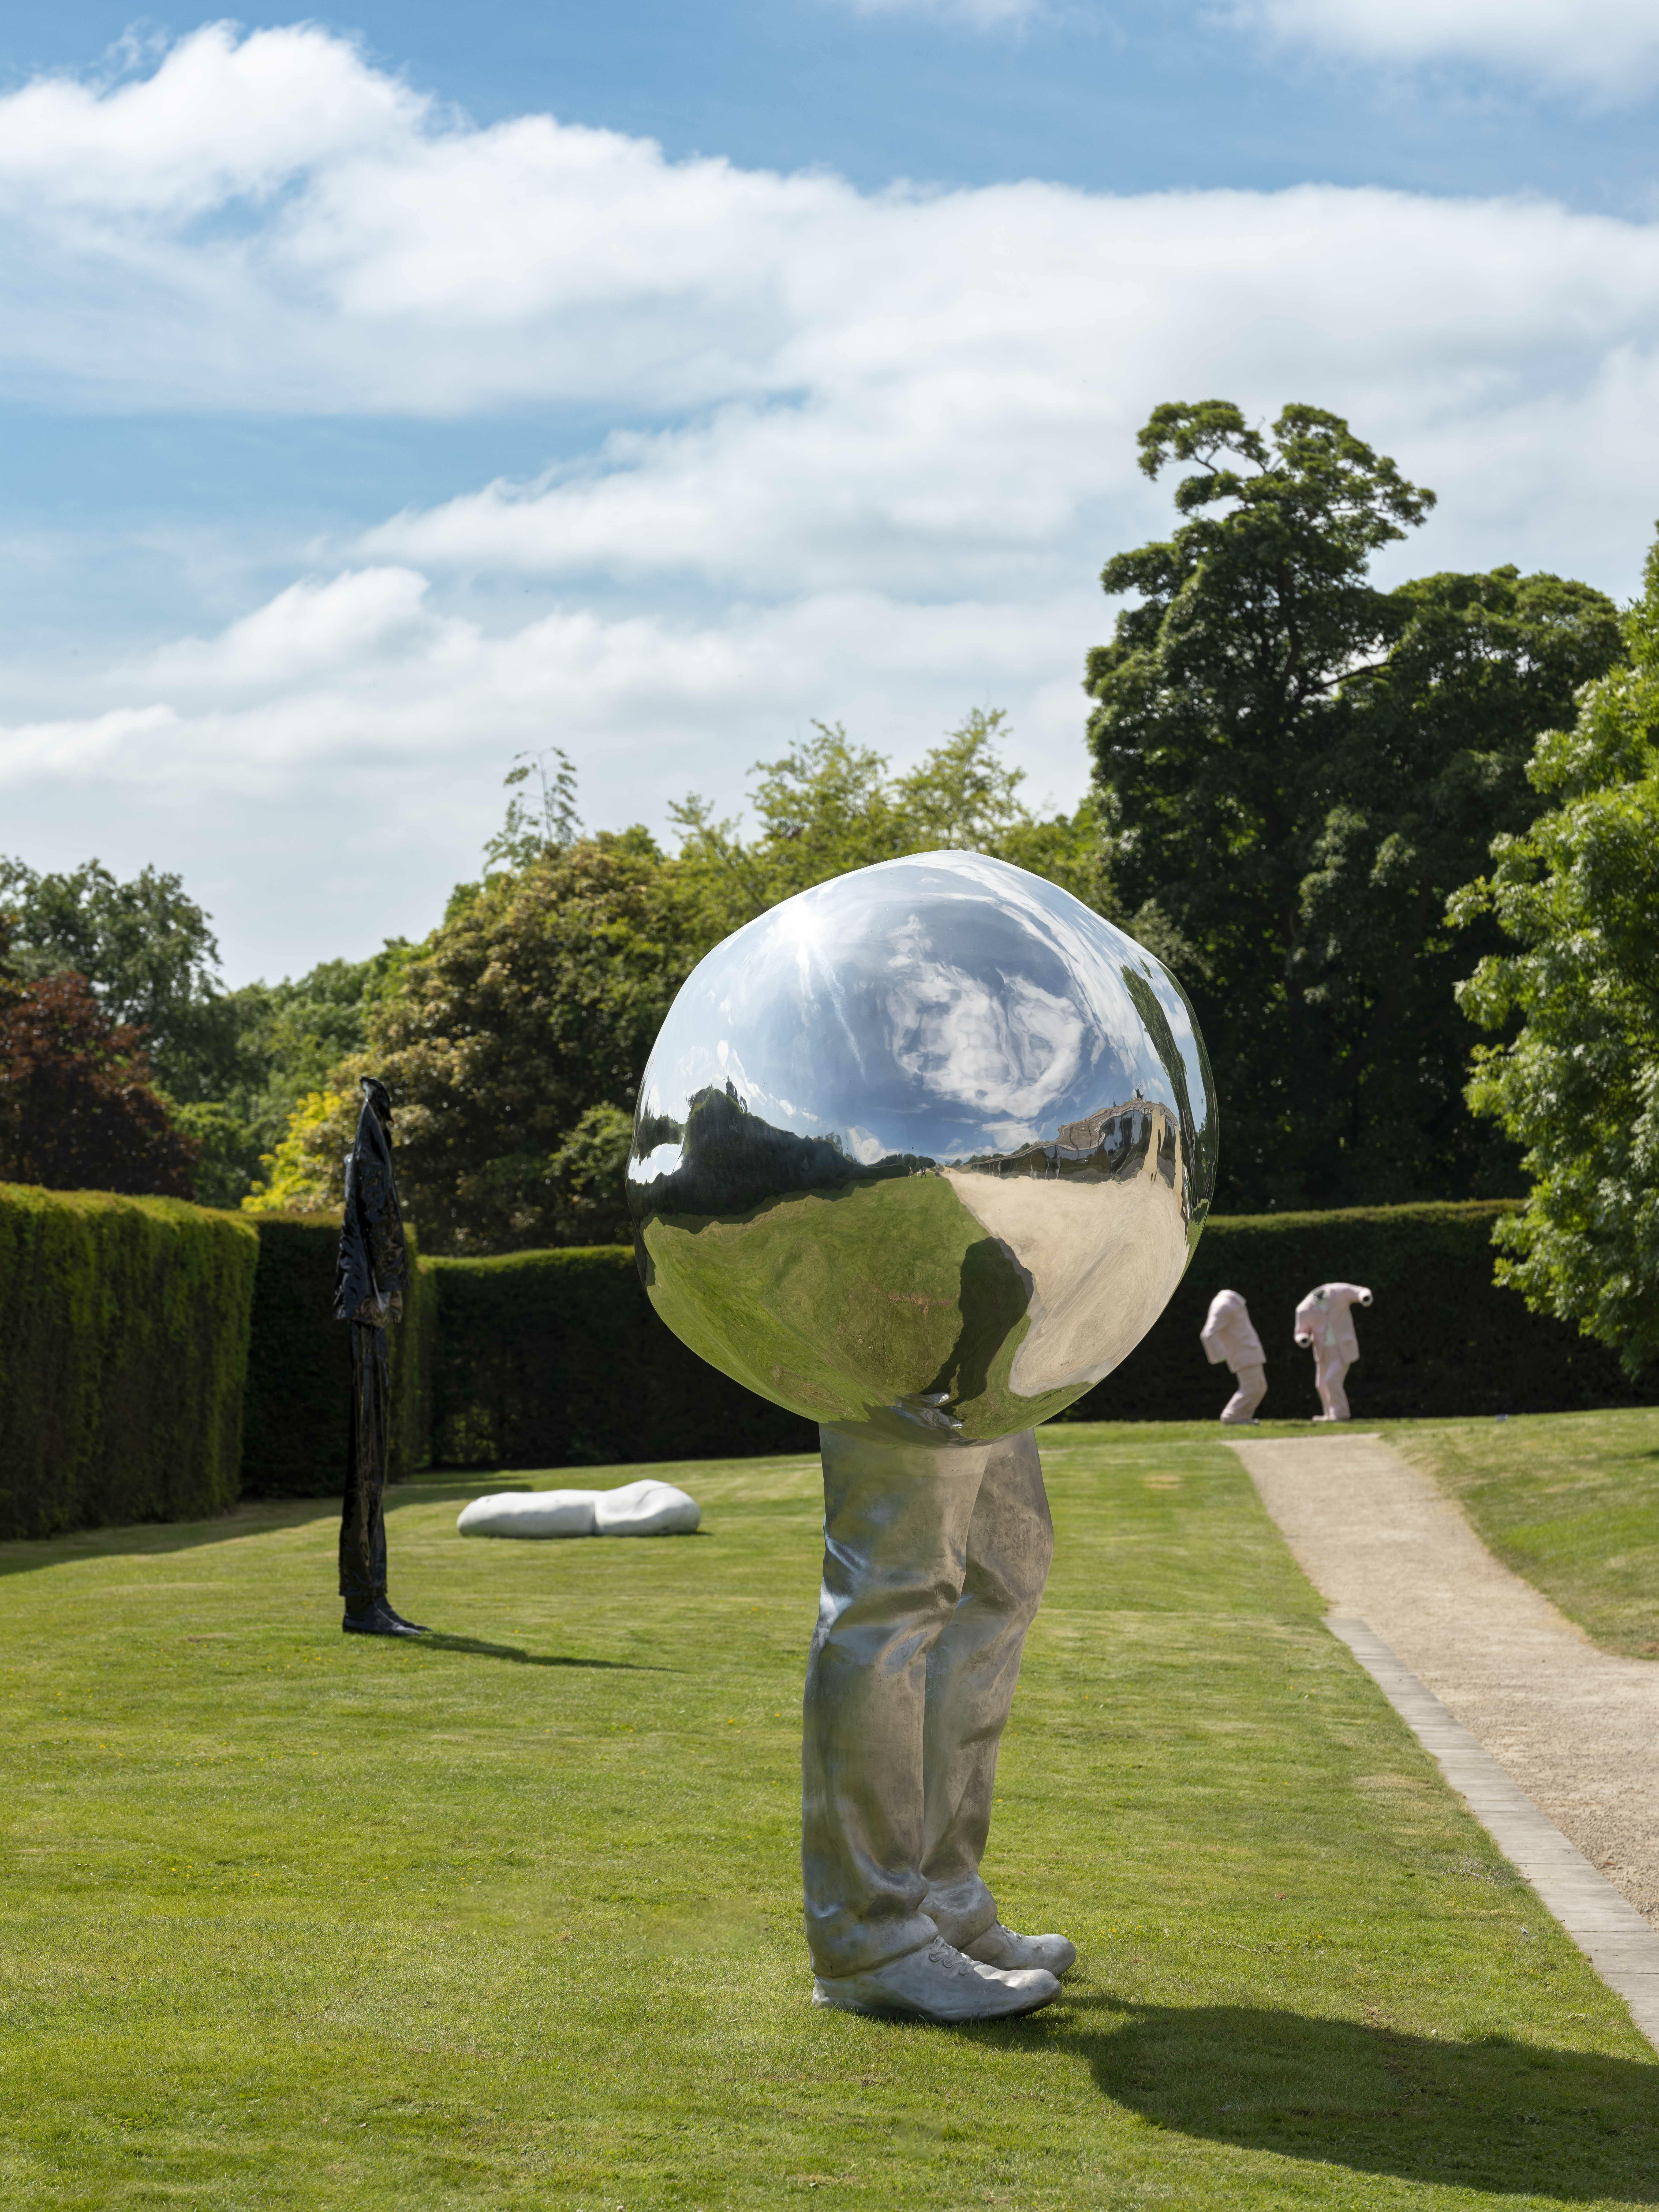 A silver sculpture with legs on the lawn and more sculptures in the background.